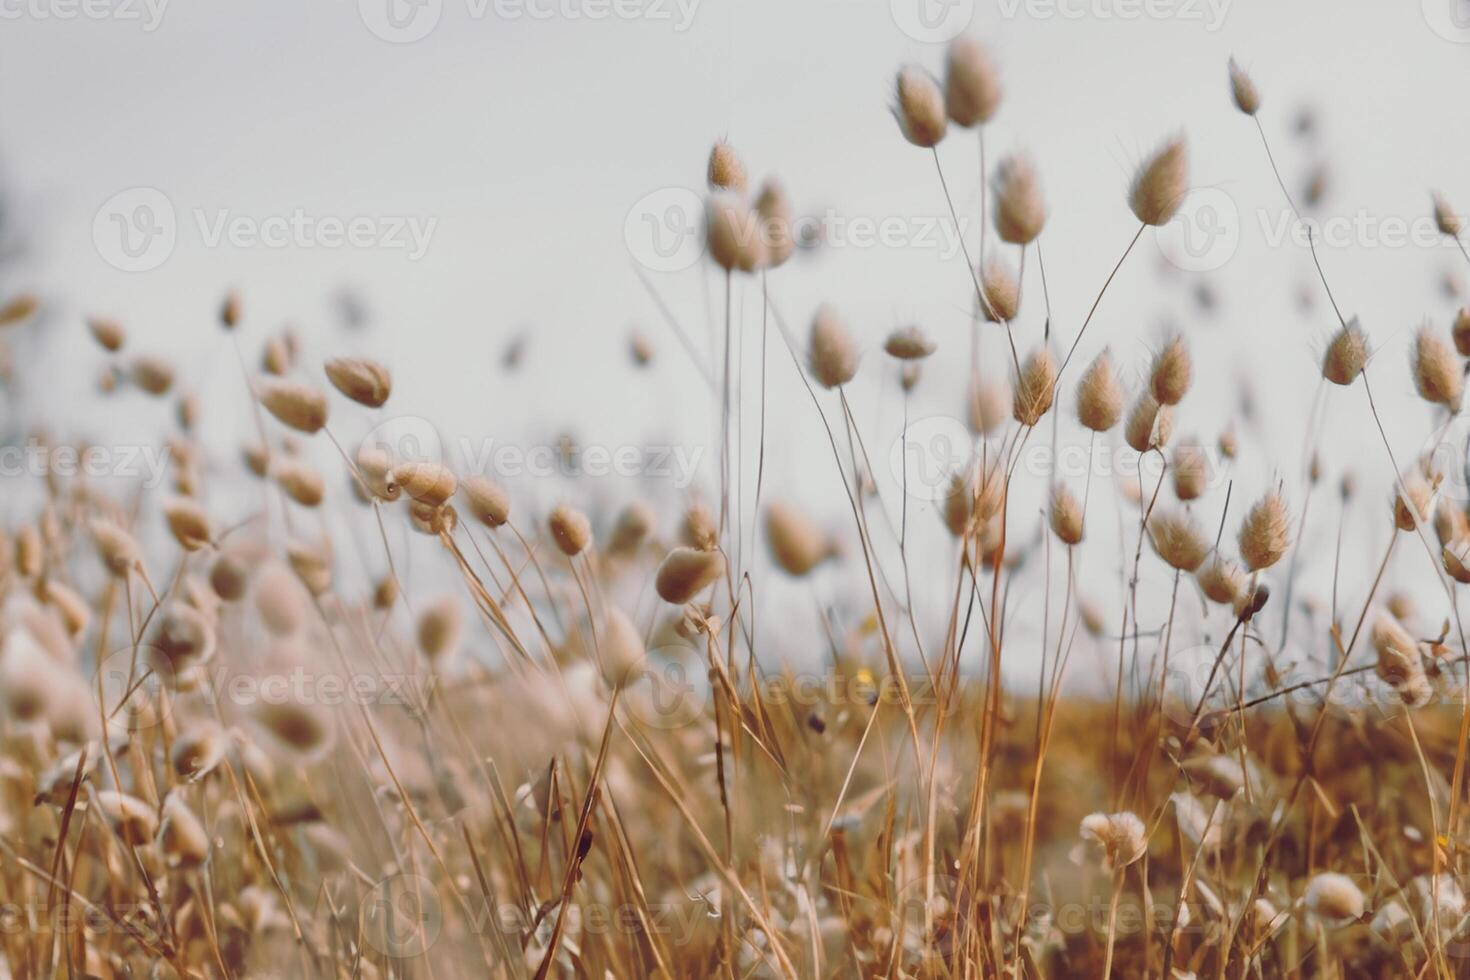 Bunny tails grass on vintage style, natura background photo